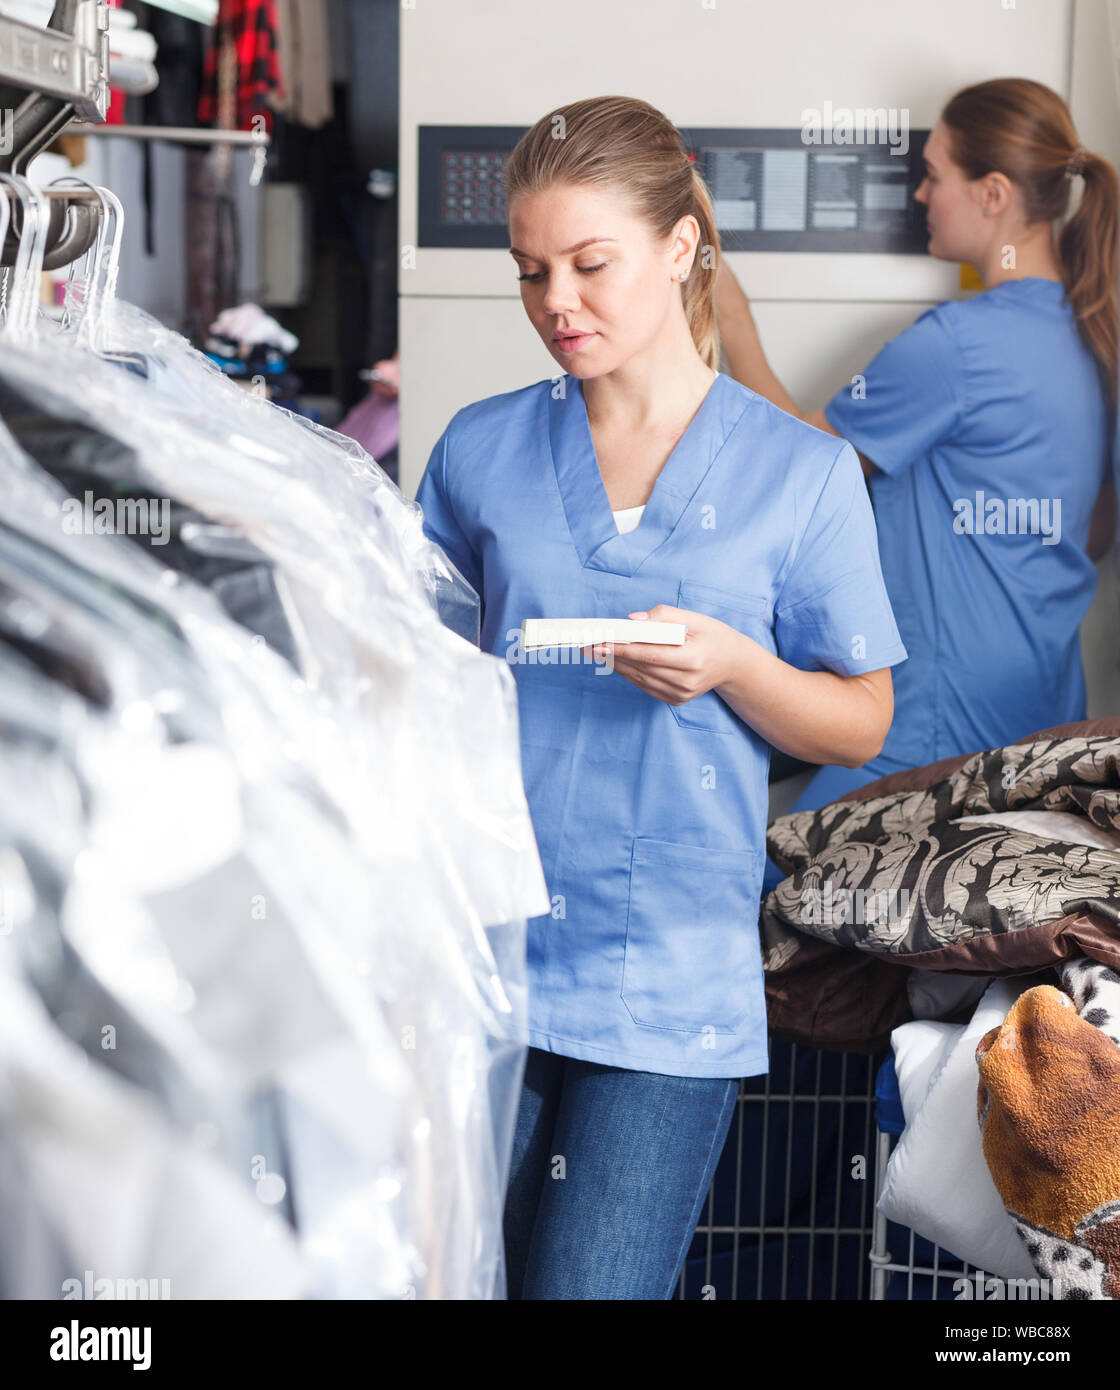 Young female worker of laundry inspecting clothing after dry cleaning on racks Stock Photo